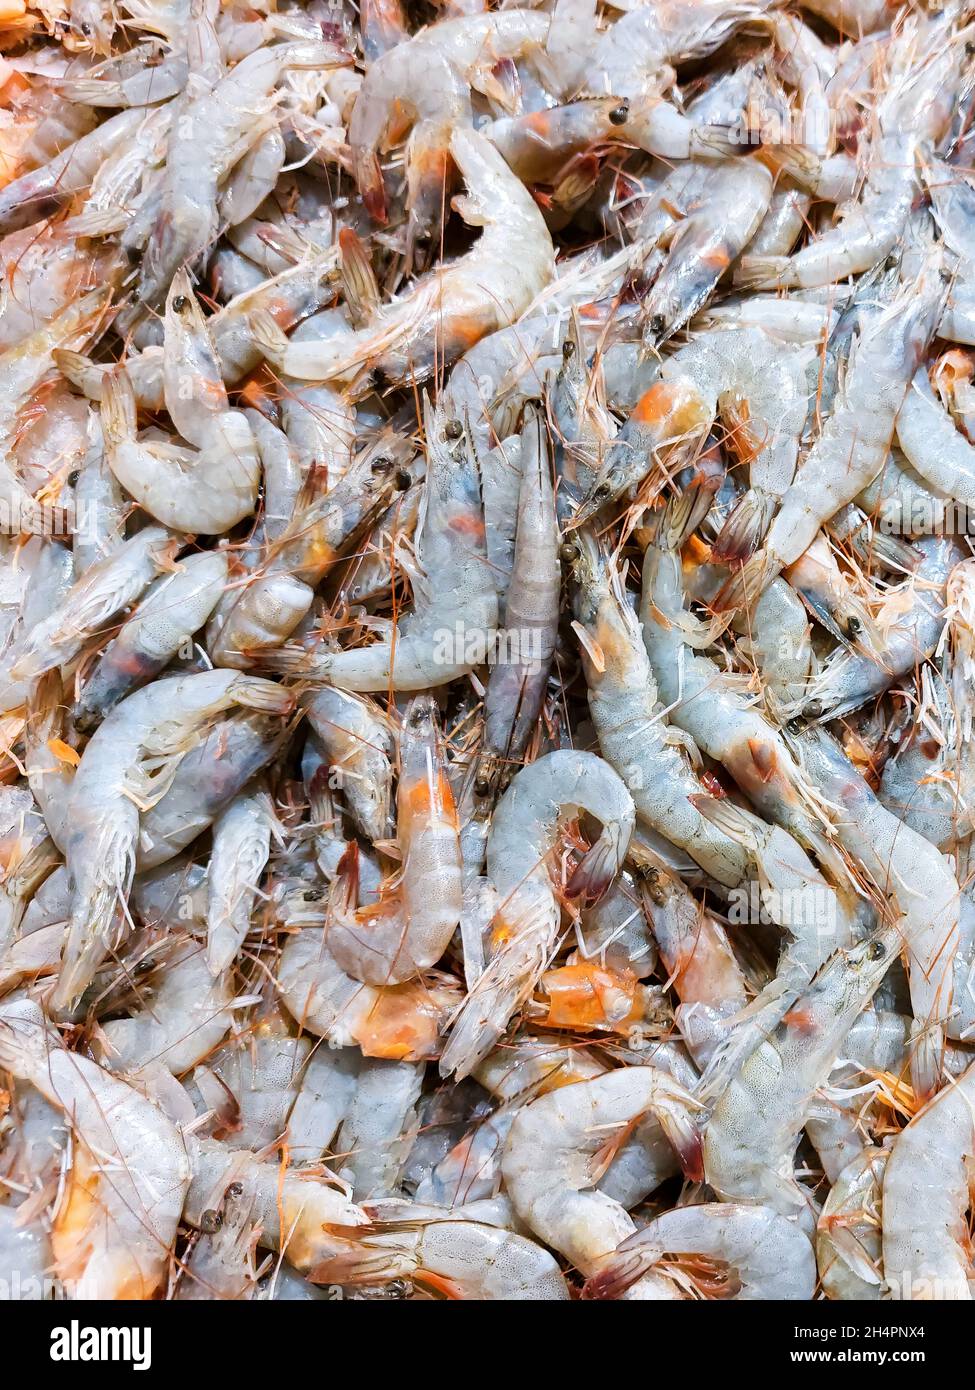 Fresh black tiger shrimp. Seafood cooking concept. Healthy food. Recipe ingredient. Market product Stock Photo